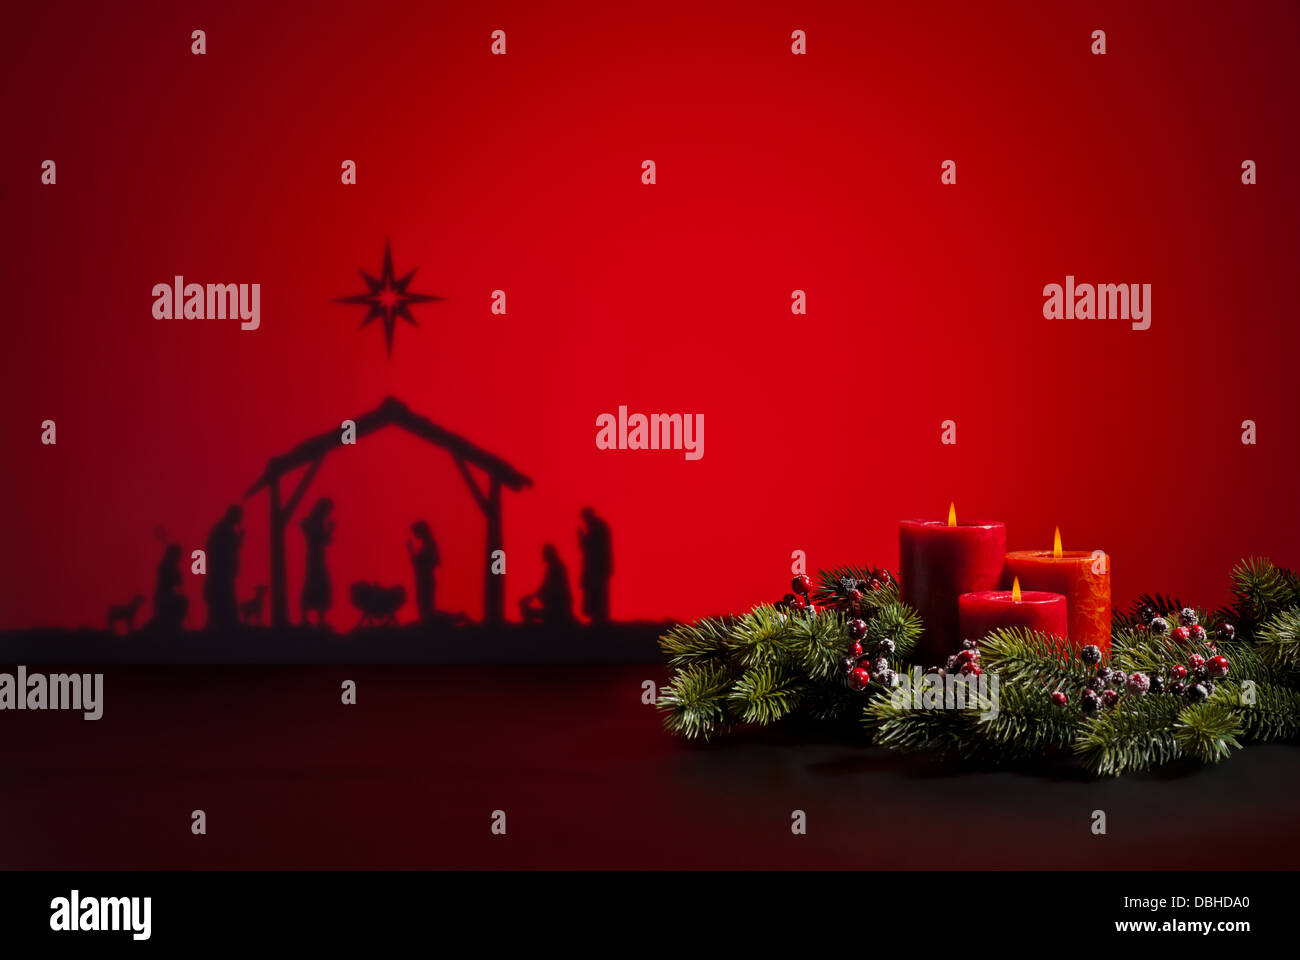 Birth Jesus silhouette of the crib in Bethlehem and candles Stock Photo